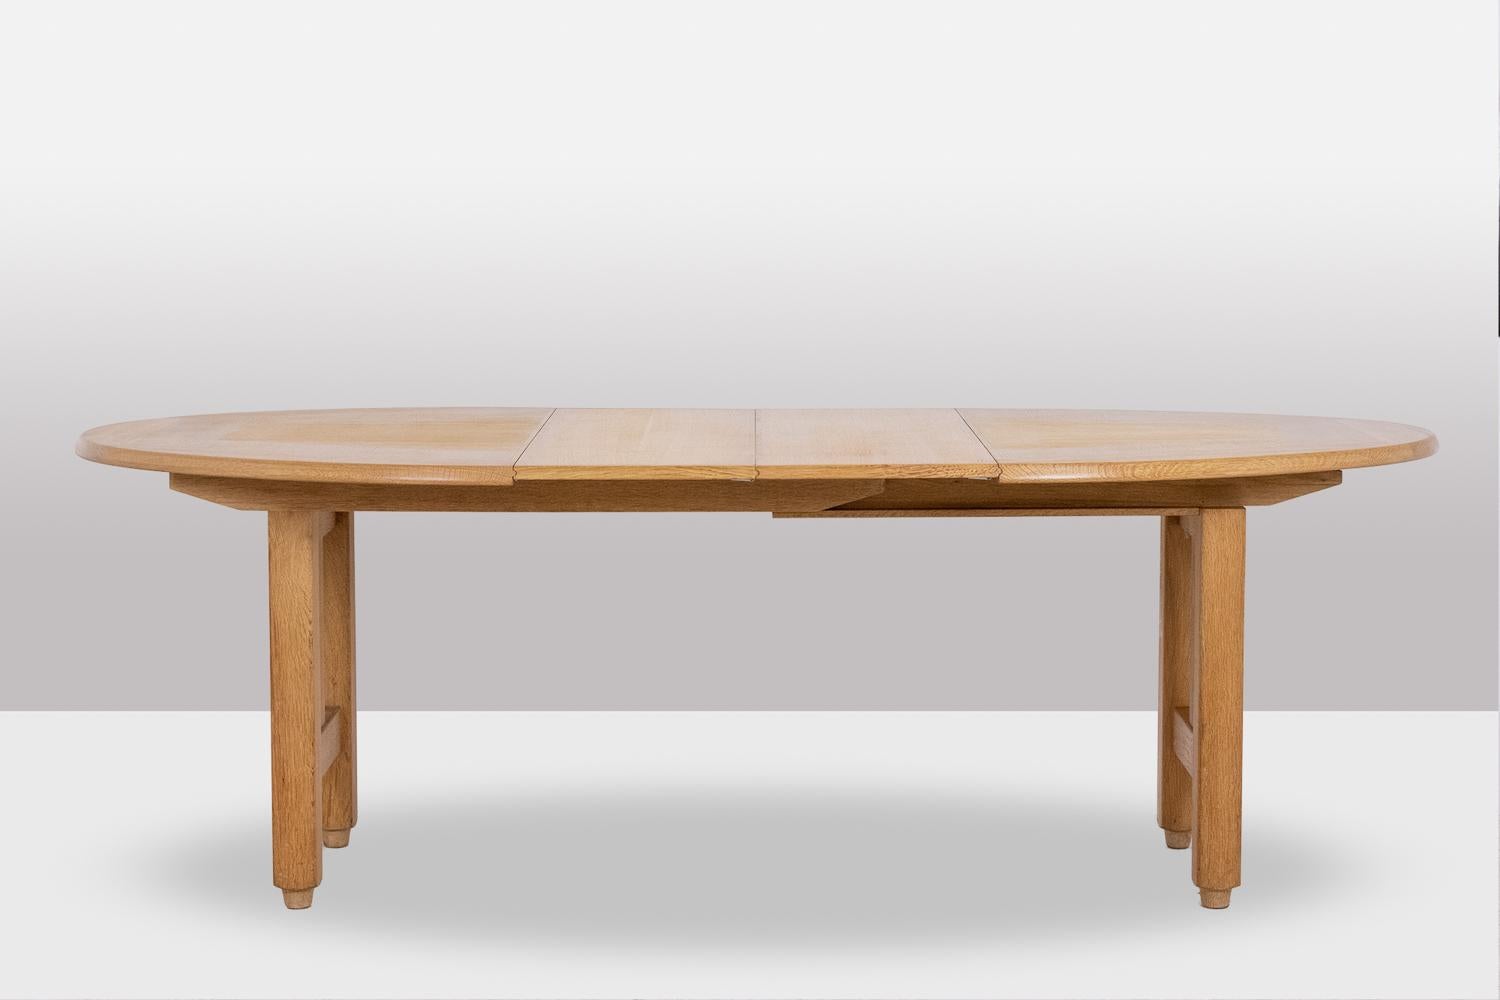 Jacques Chambron and Robert Guillerme for Votre Maison.

Oval-shaped table in natural blond oak resting on four legs, with two oak extensions, allowing to placed 4 or 6, allowing 4 or 6 people to be placed around.

French work realized in the